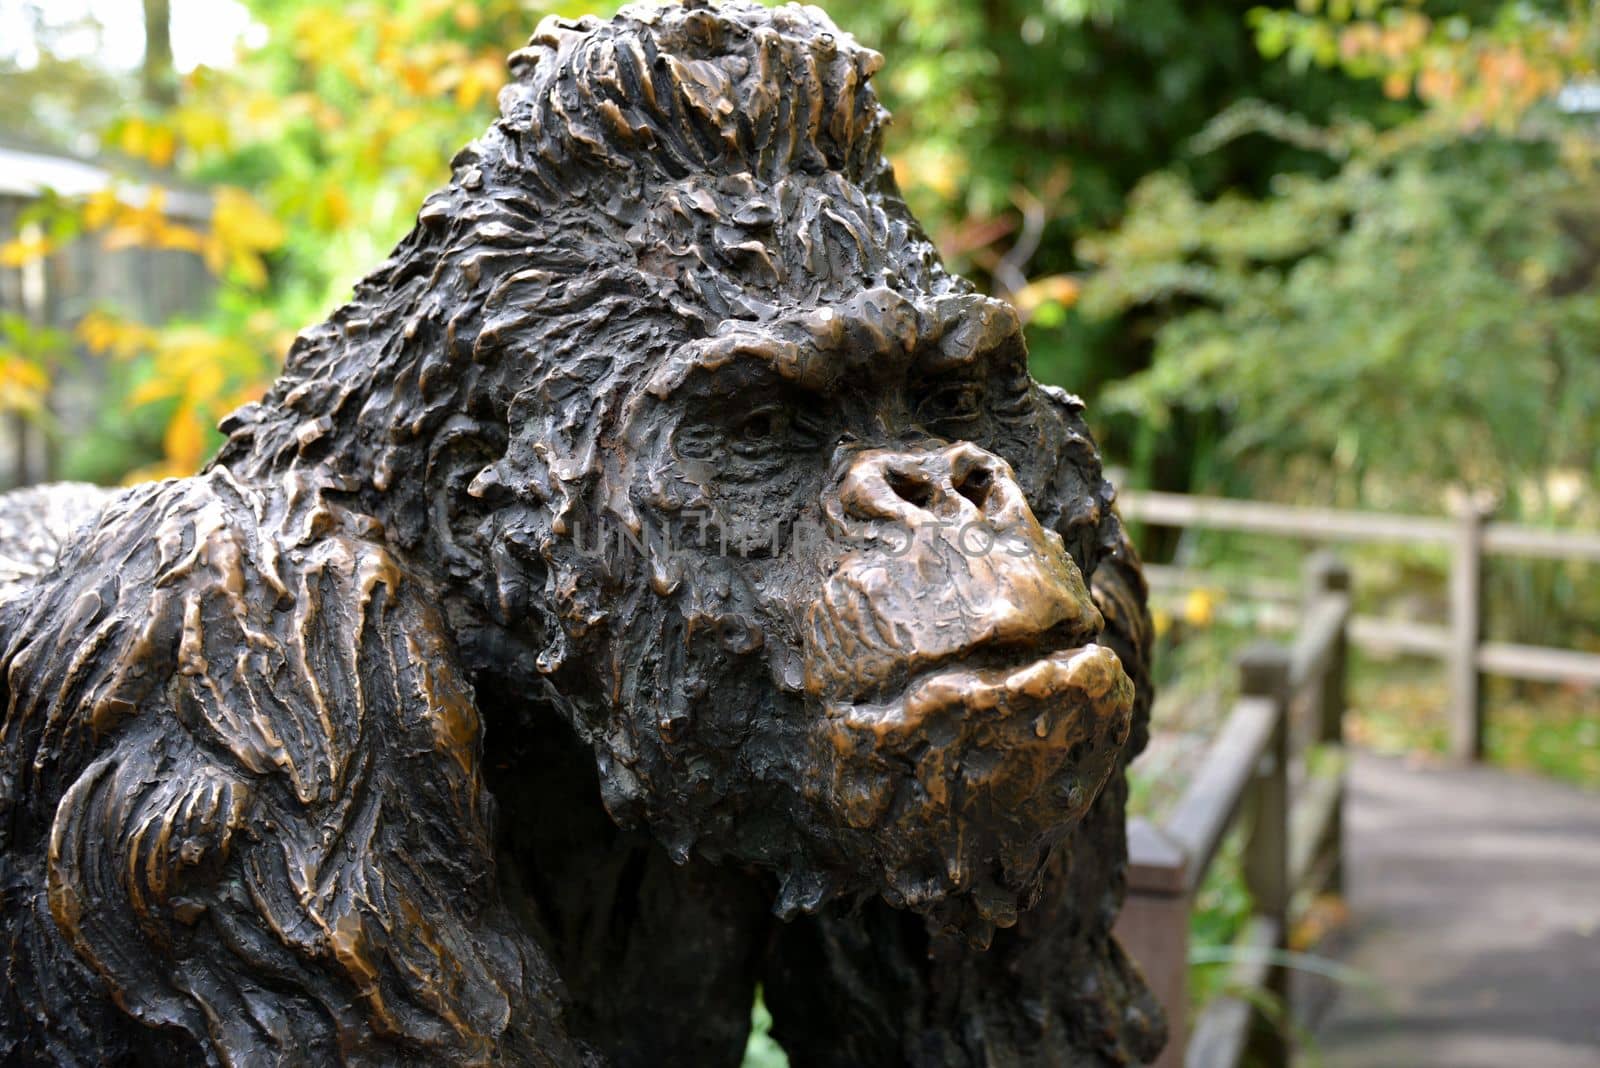 Sculpture of a gorilla at the zoo of Antwerp.